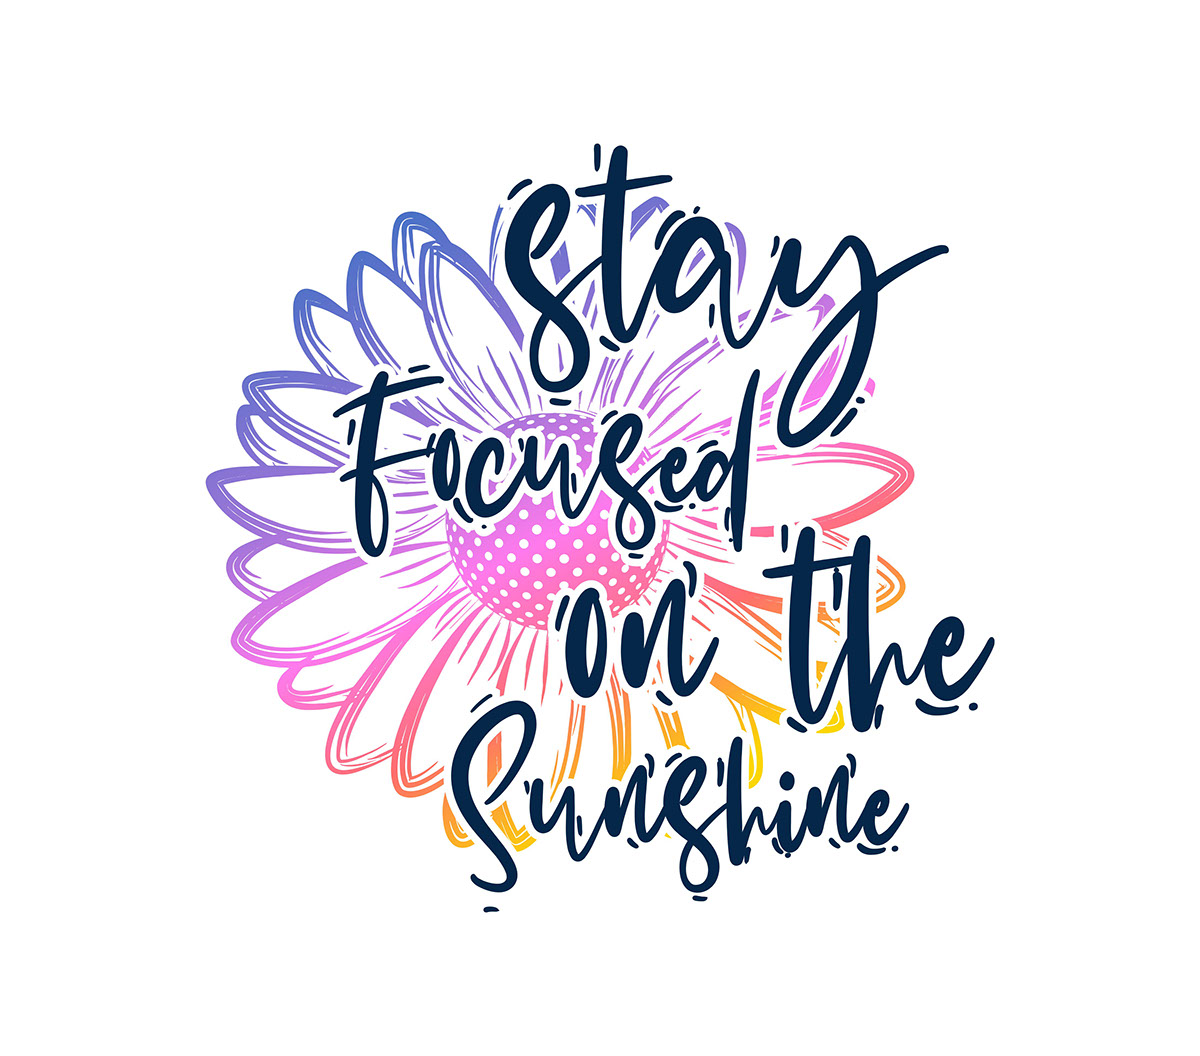 Stay focused on the sunshine rendition image